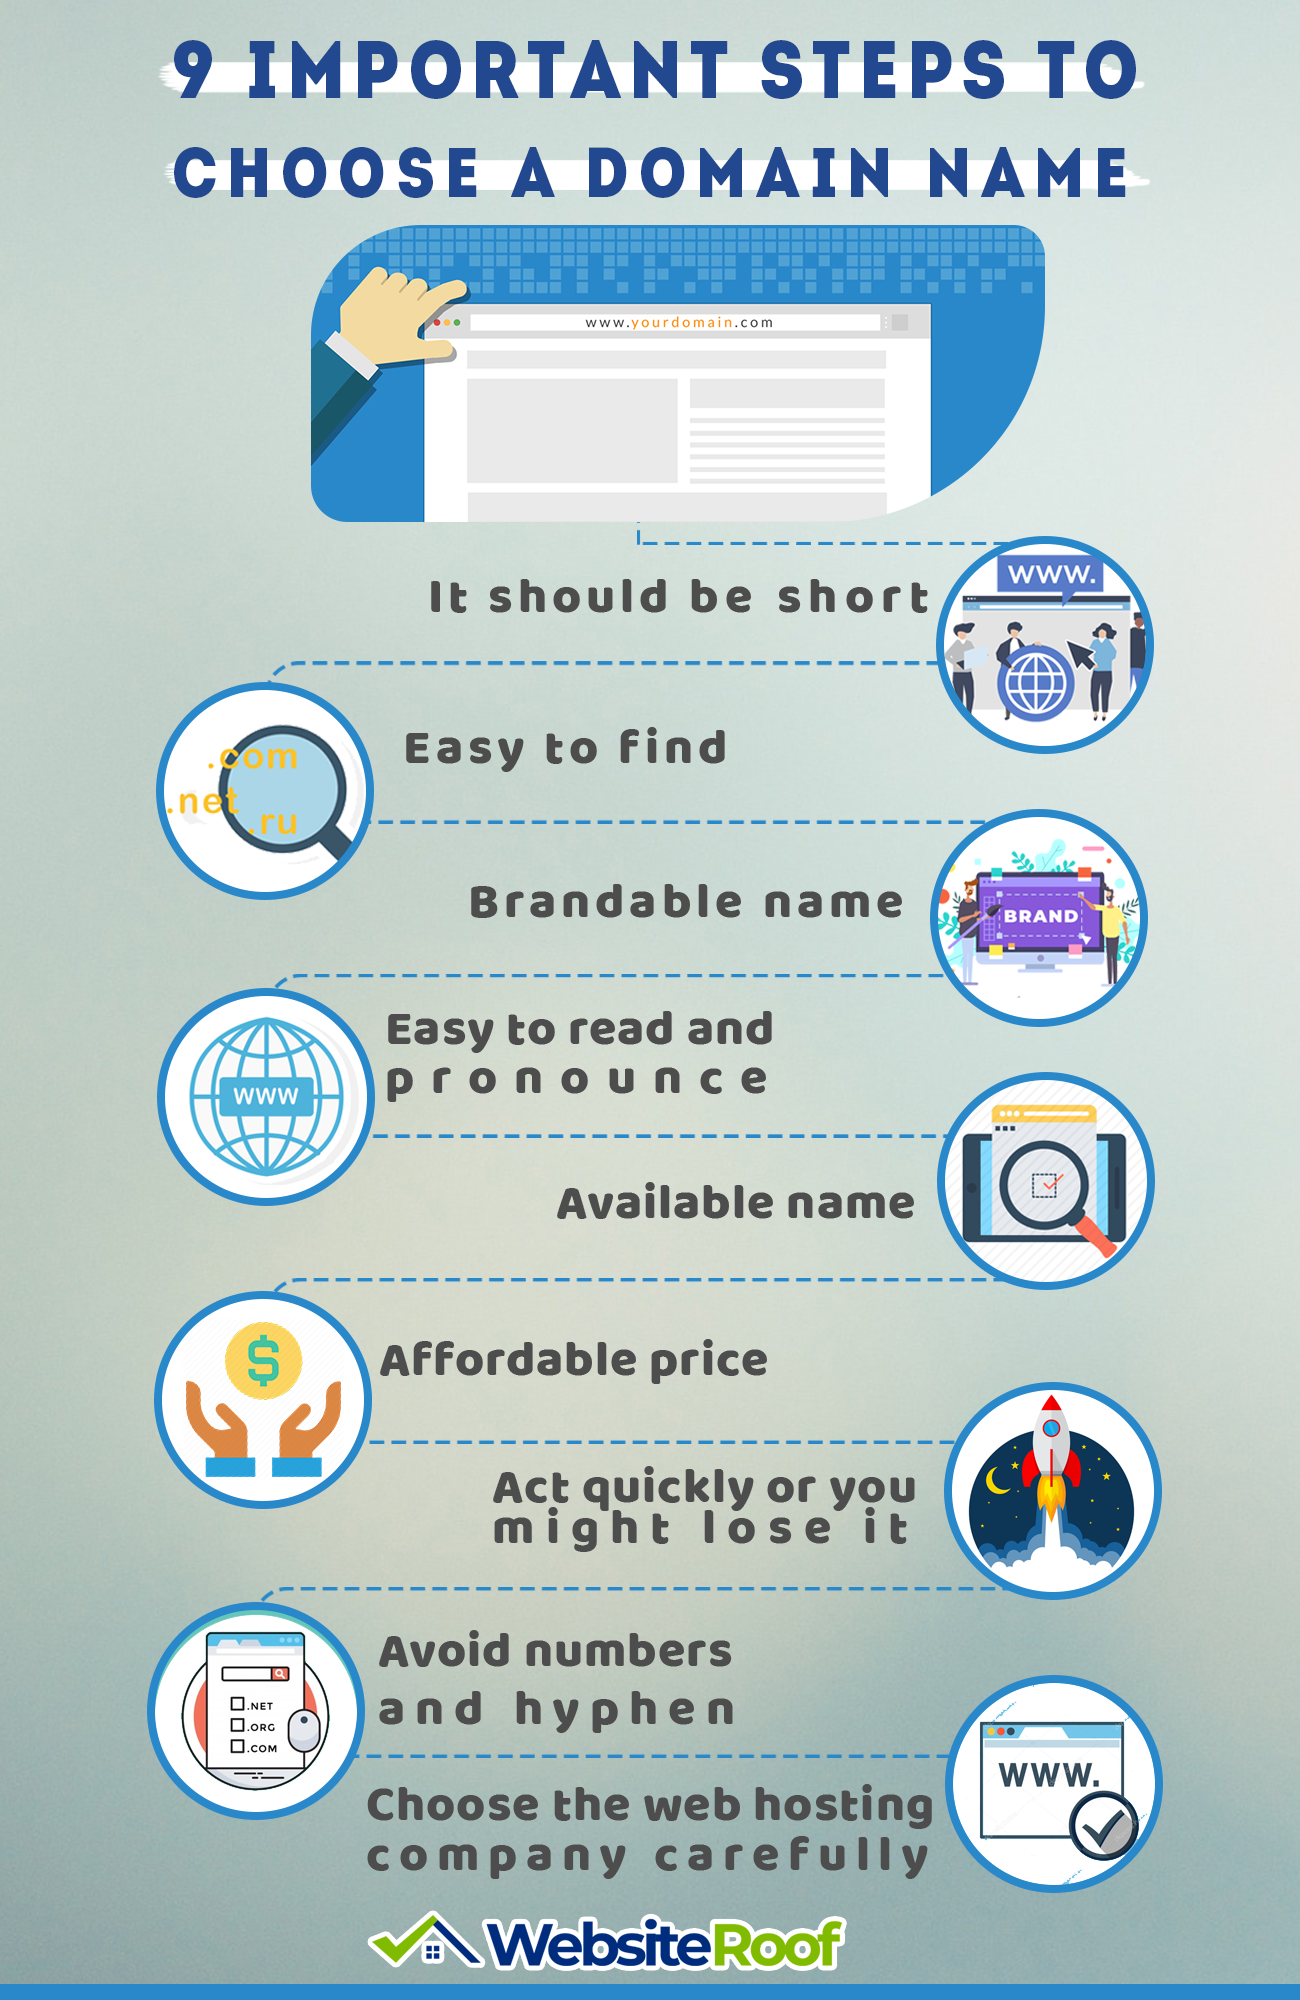 How to choose a Domain Name